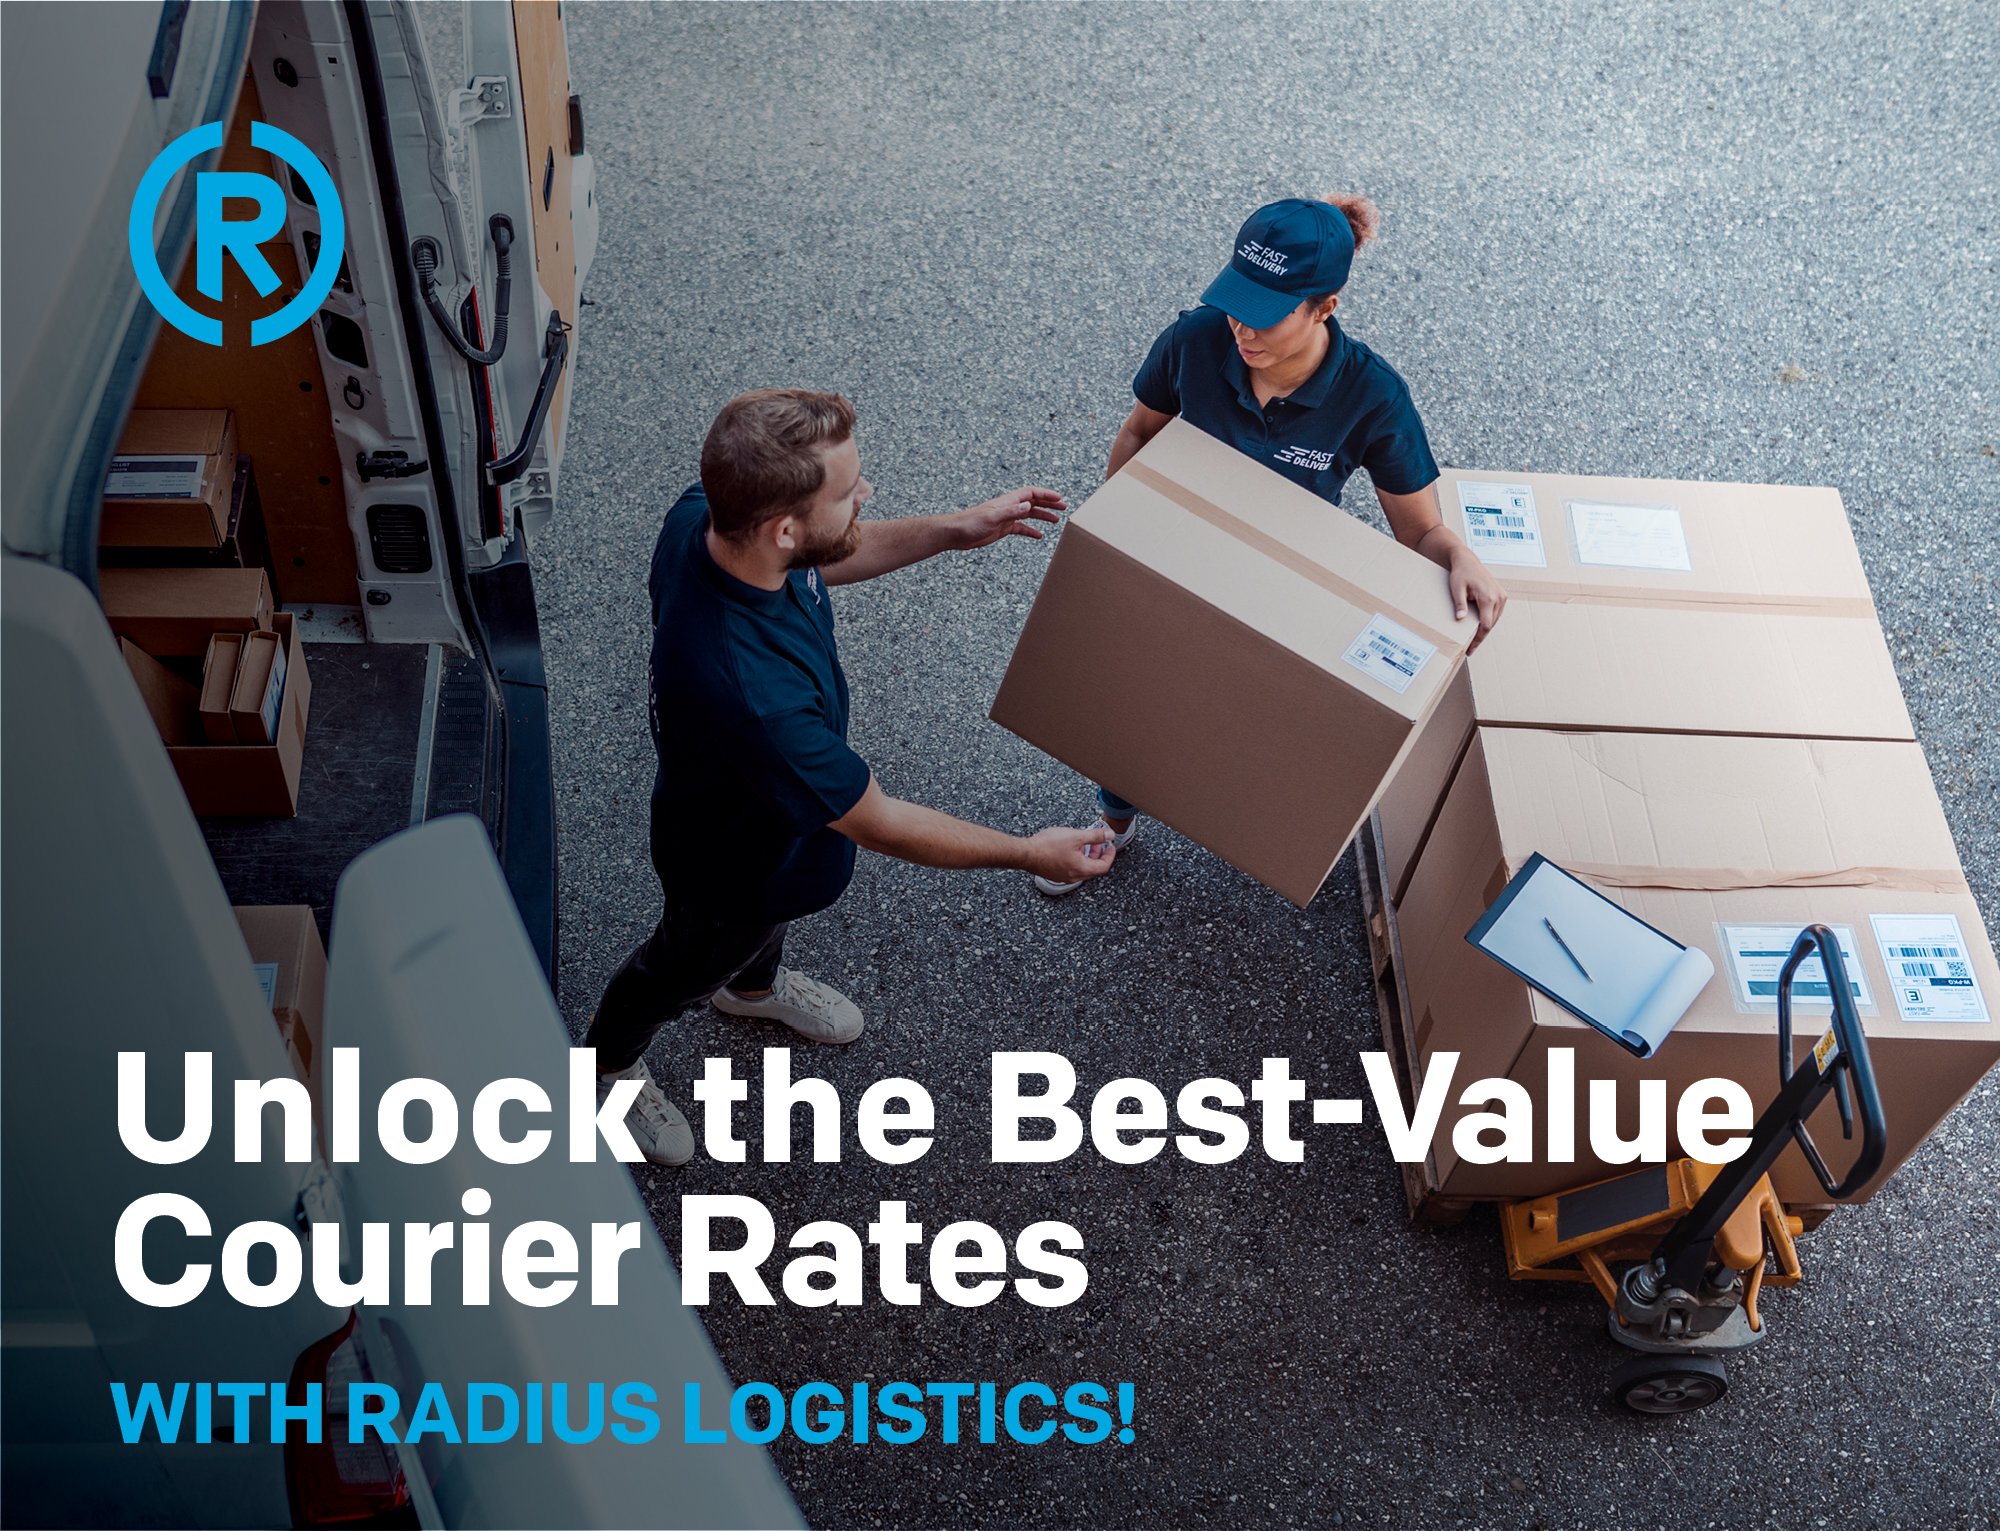 Unlock the best-value courier rates - UPS